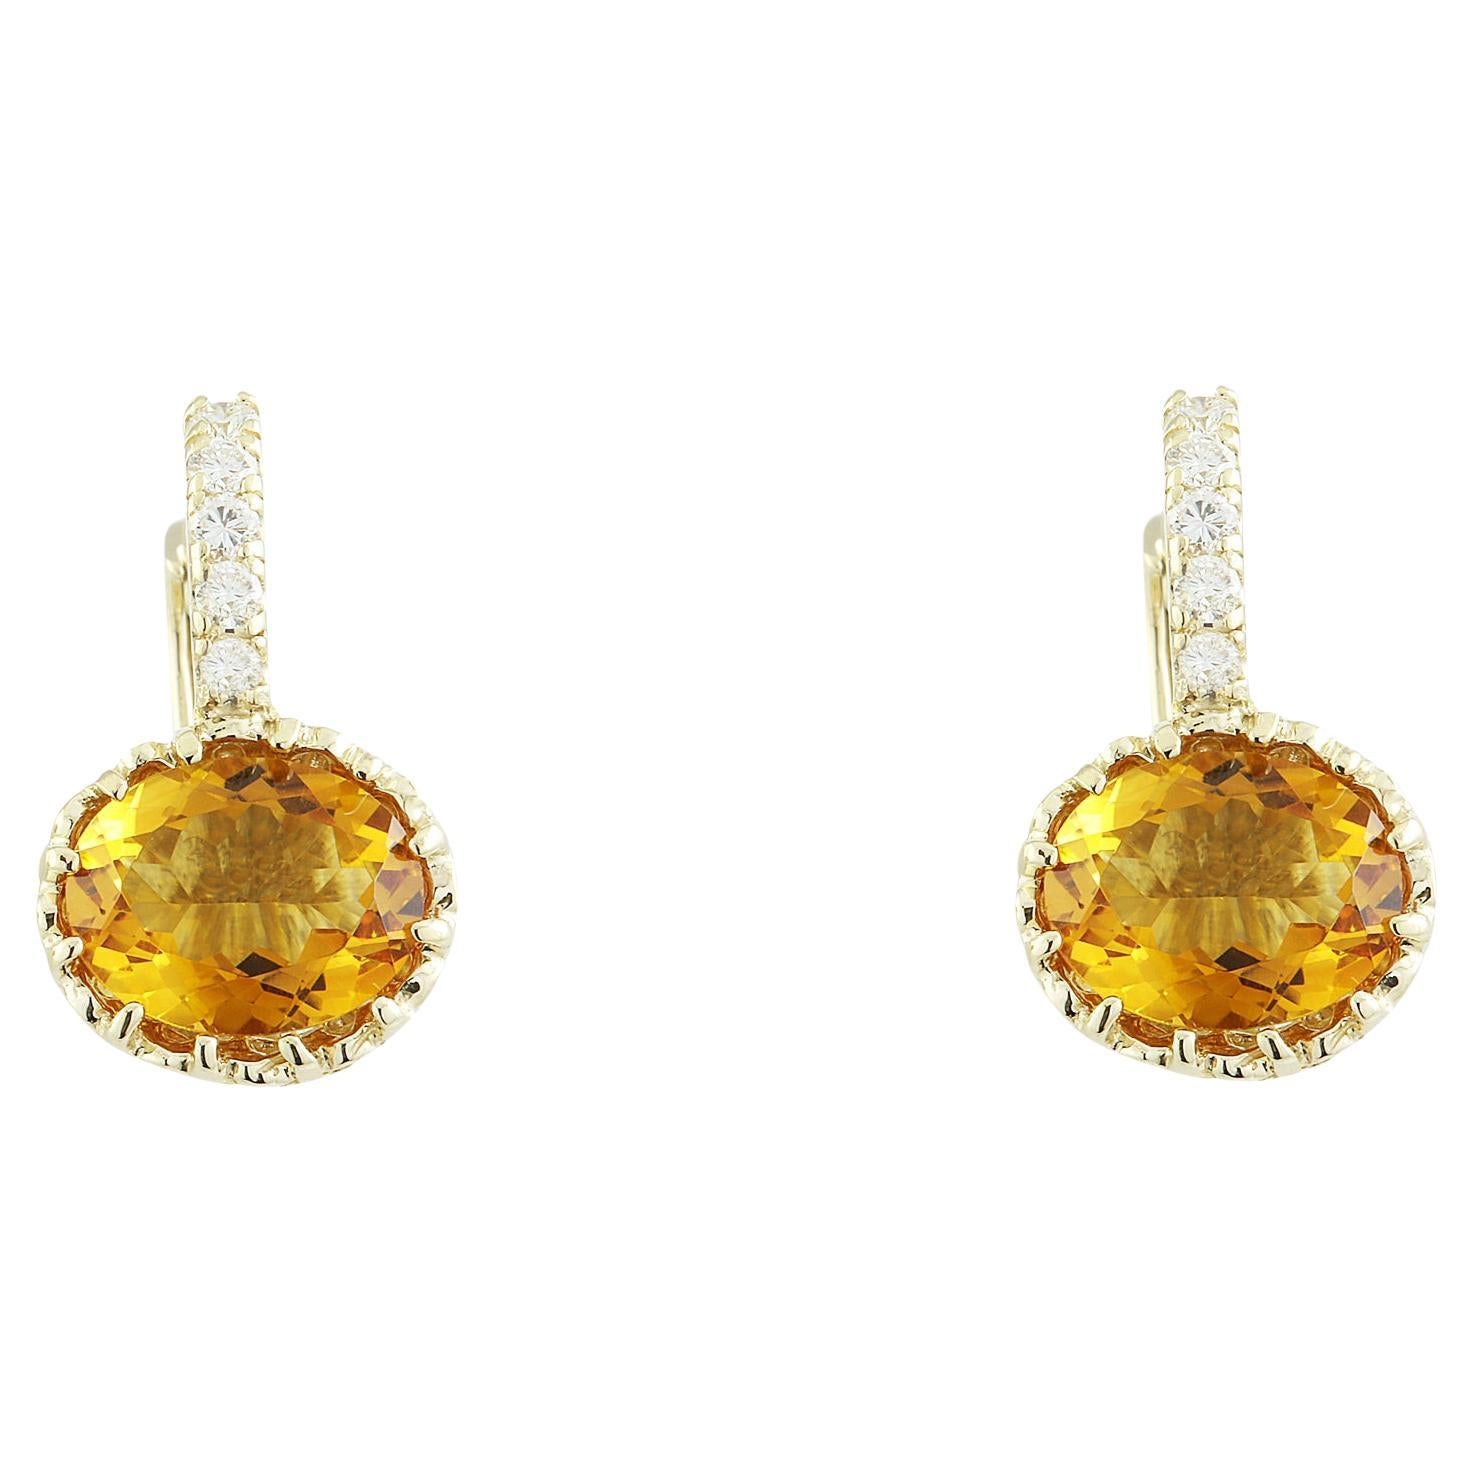 Dazzling Natural Citrine Diamond Earrings in 14K Solid Yellow Gold